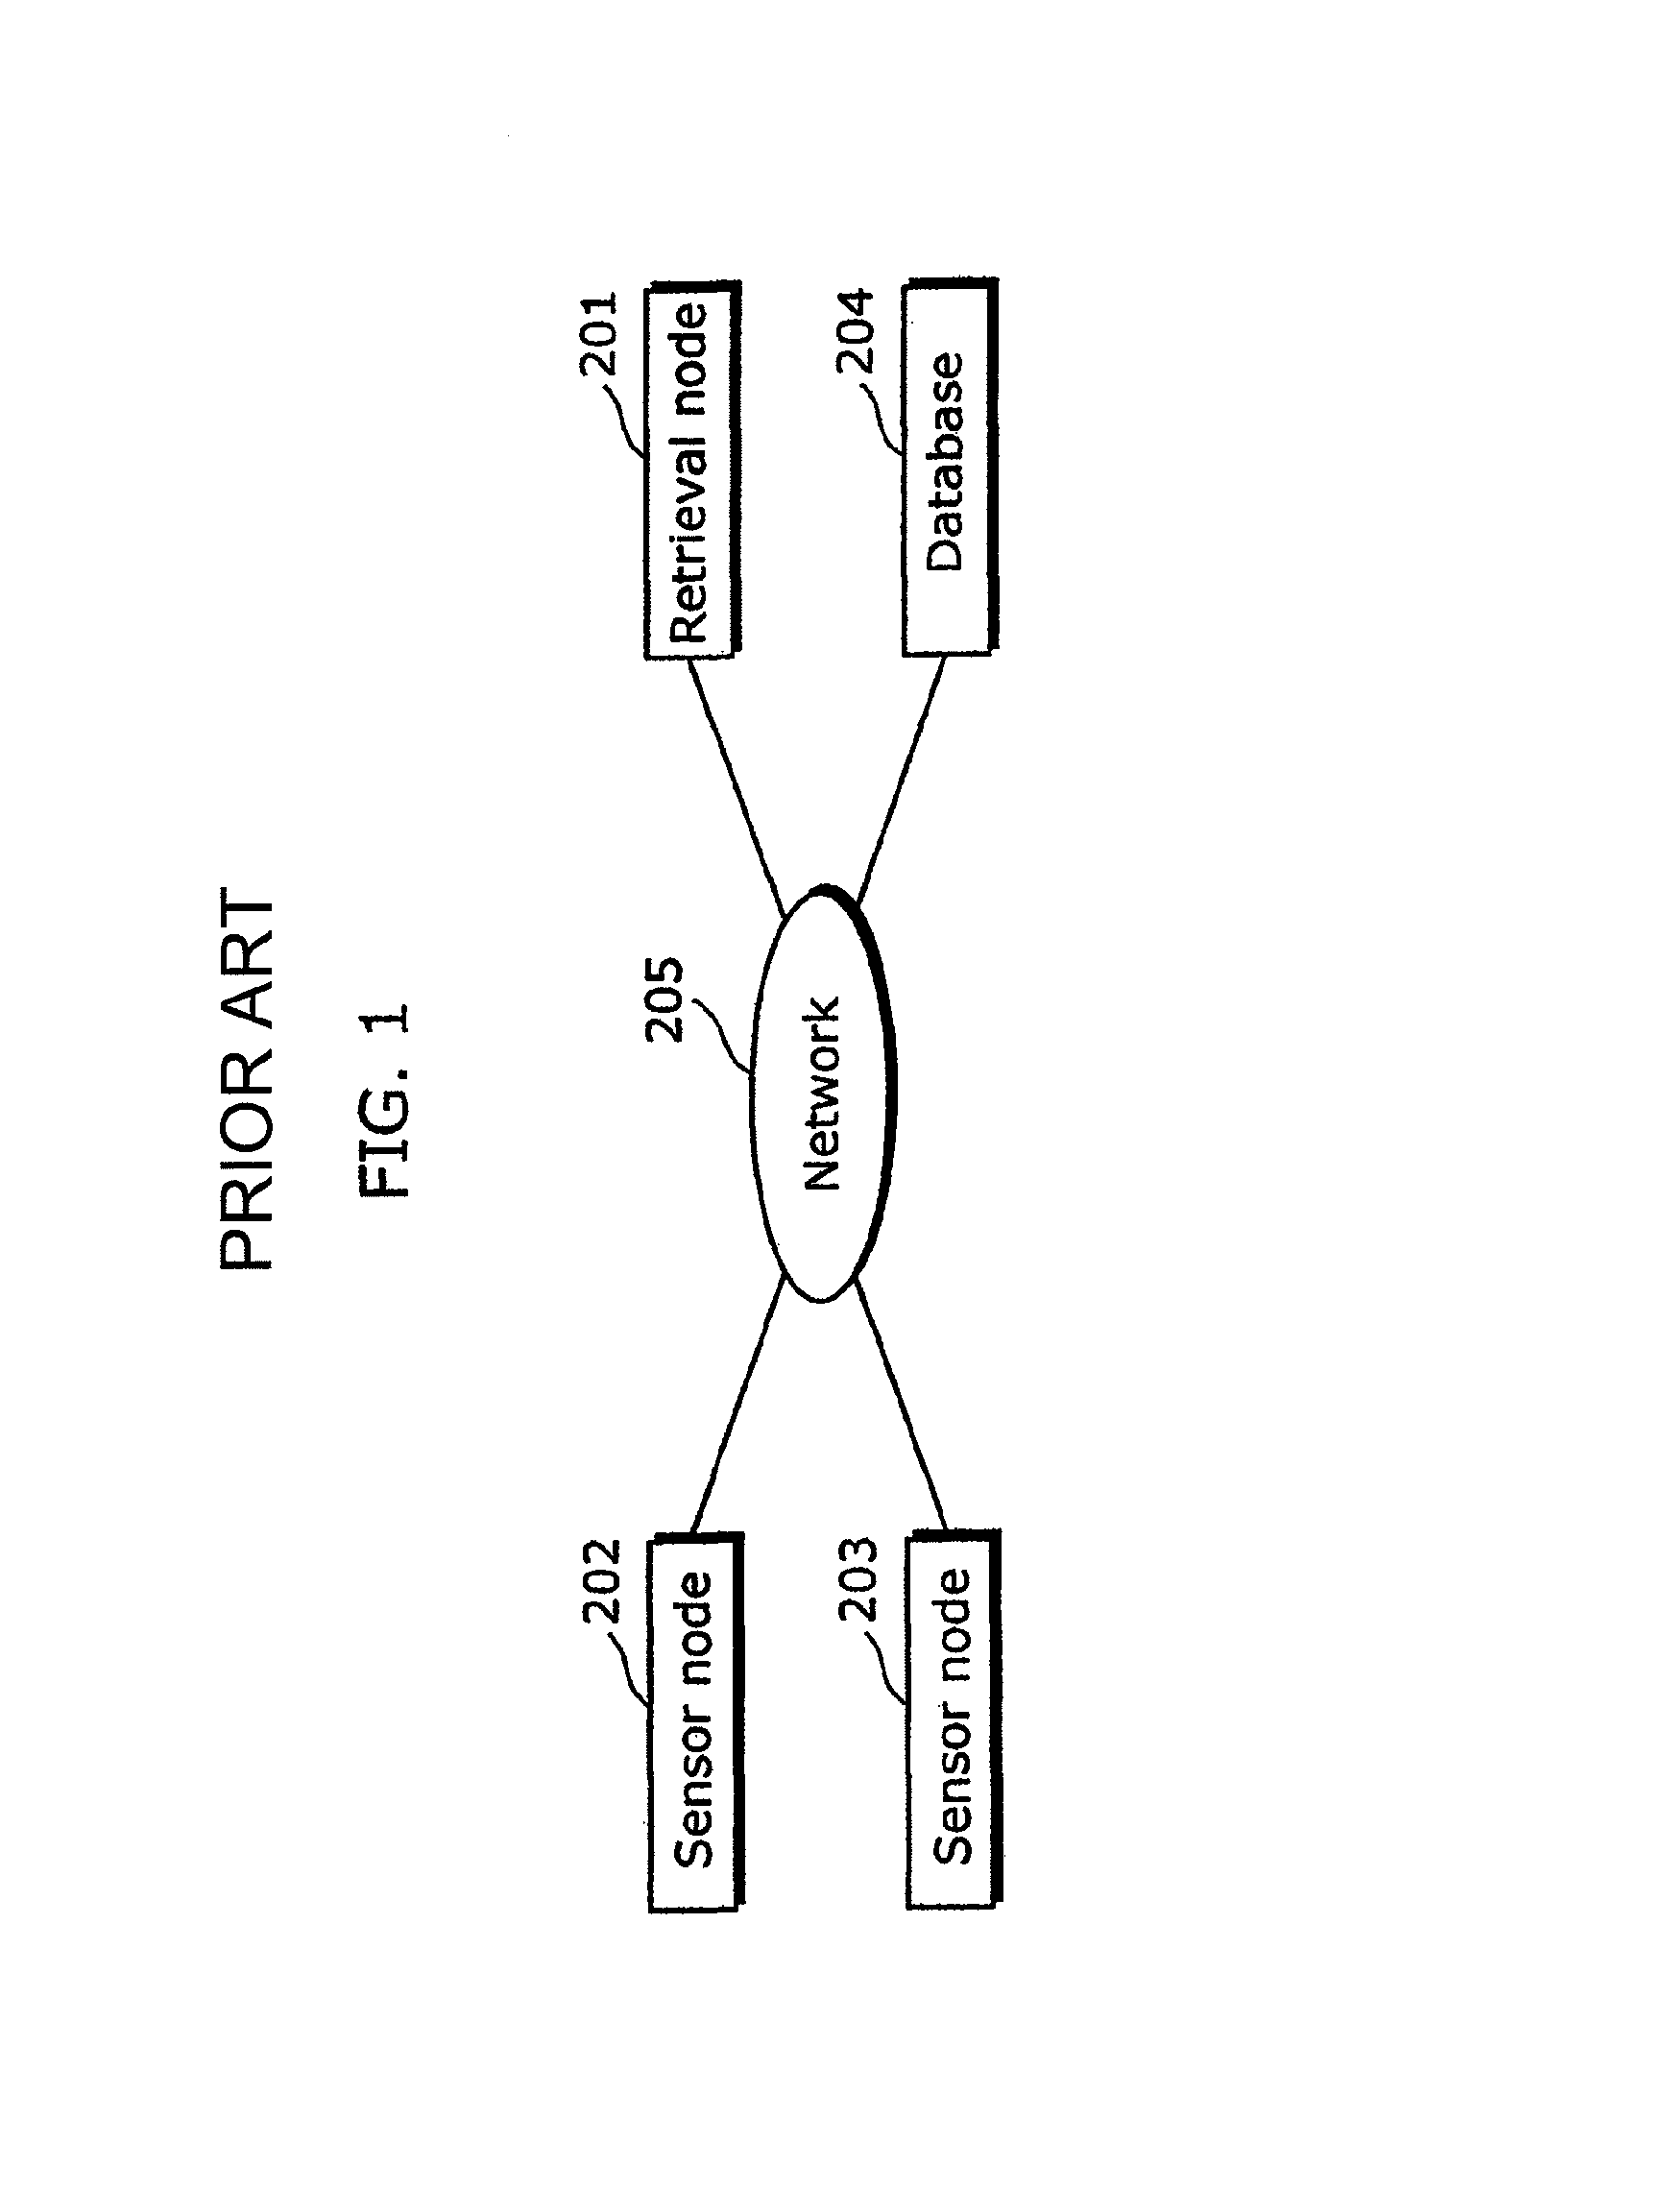 Sensor device which measures surrounding conditions and obtains a newly measured value, retrieval device which utilizes a network to search sensor devices, and relay device which relays a communication between the sensor device and the retrieval device